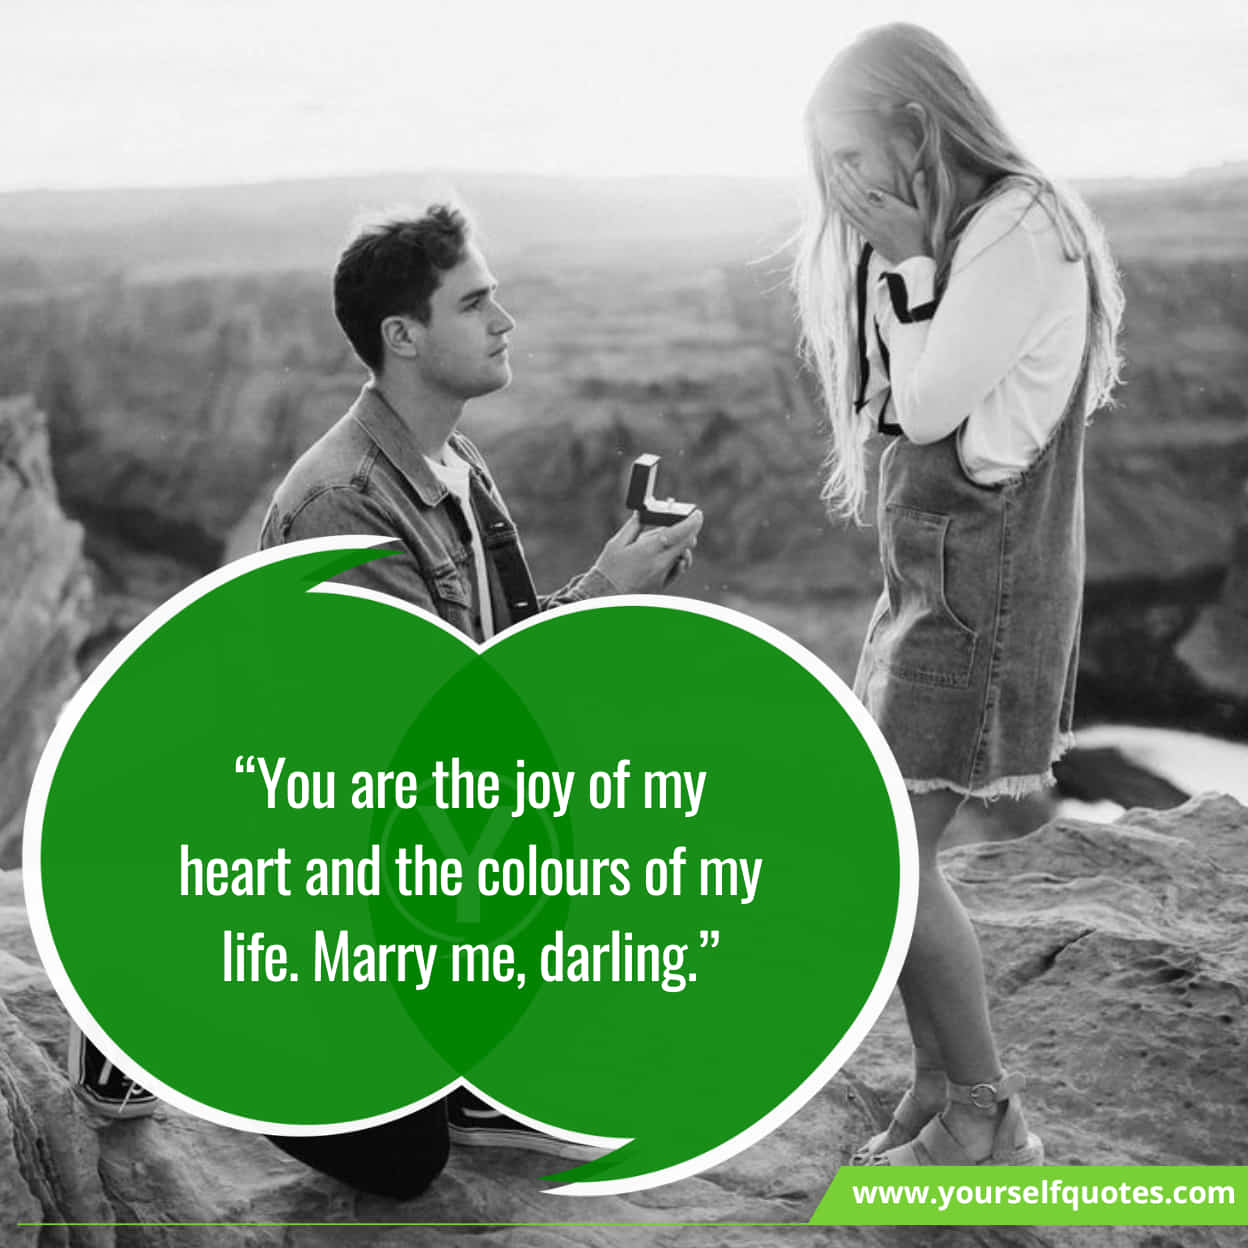 Famous Messages On Marriage Proposals